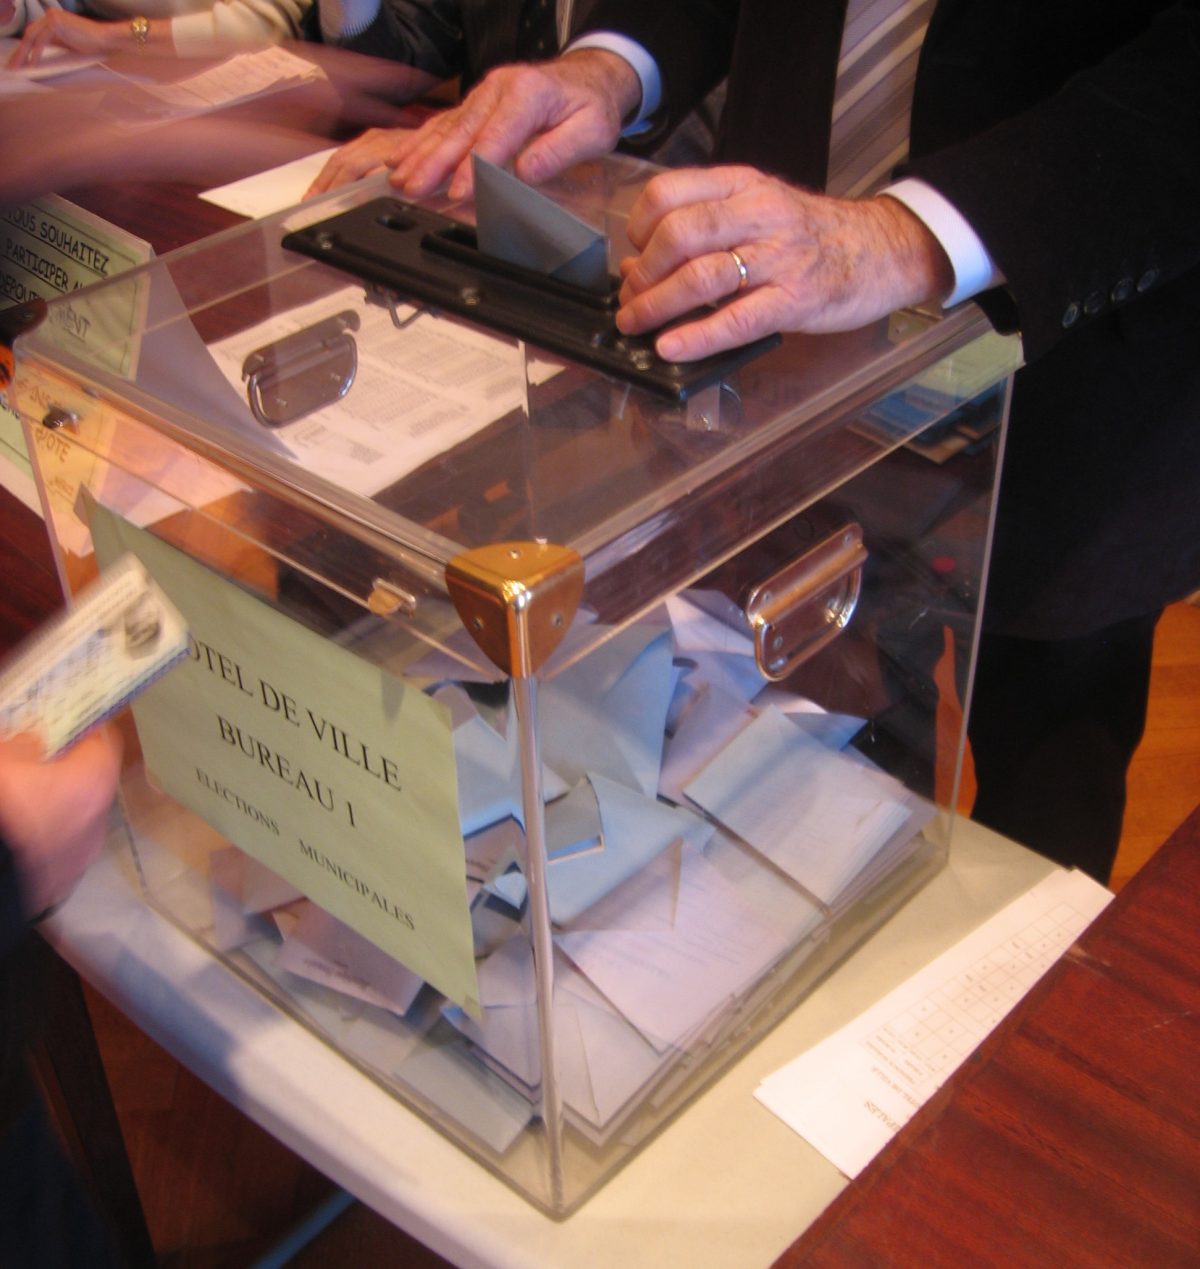 Municipal elections in France